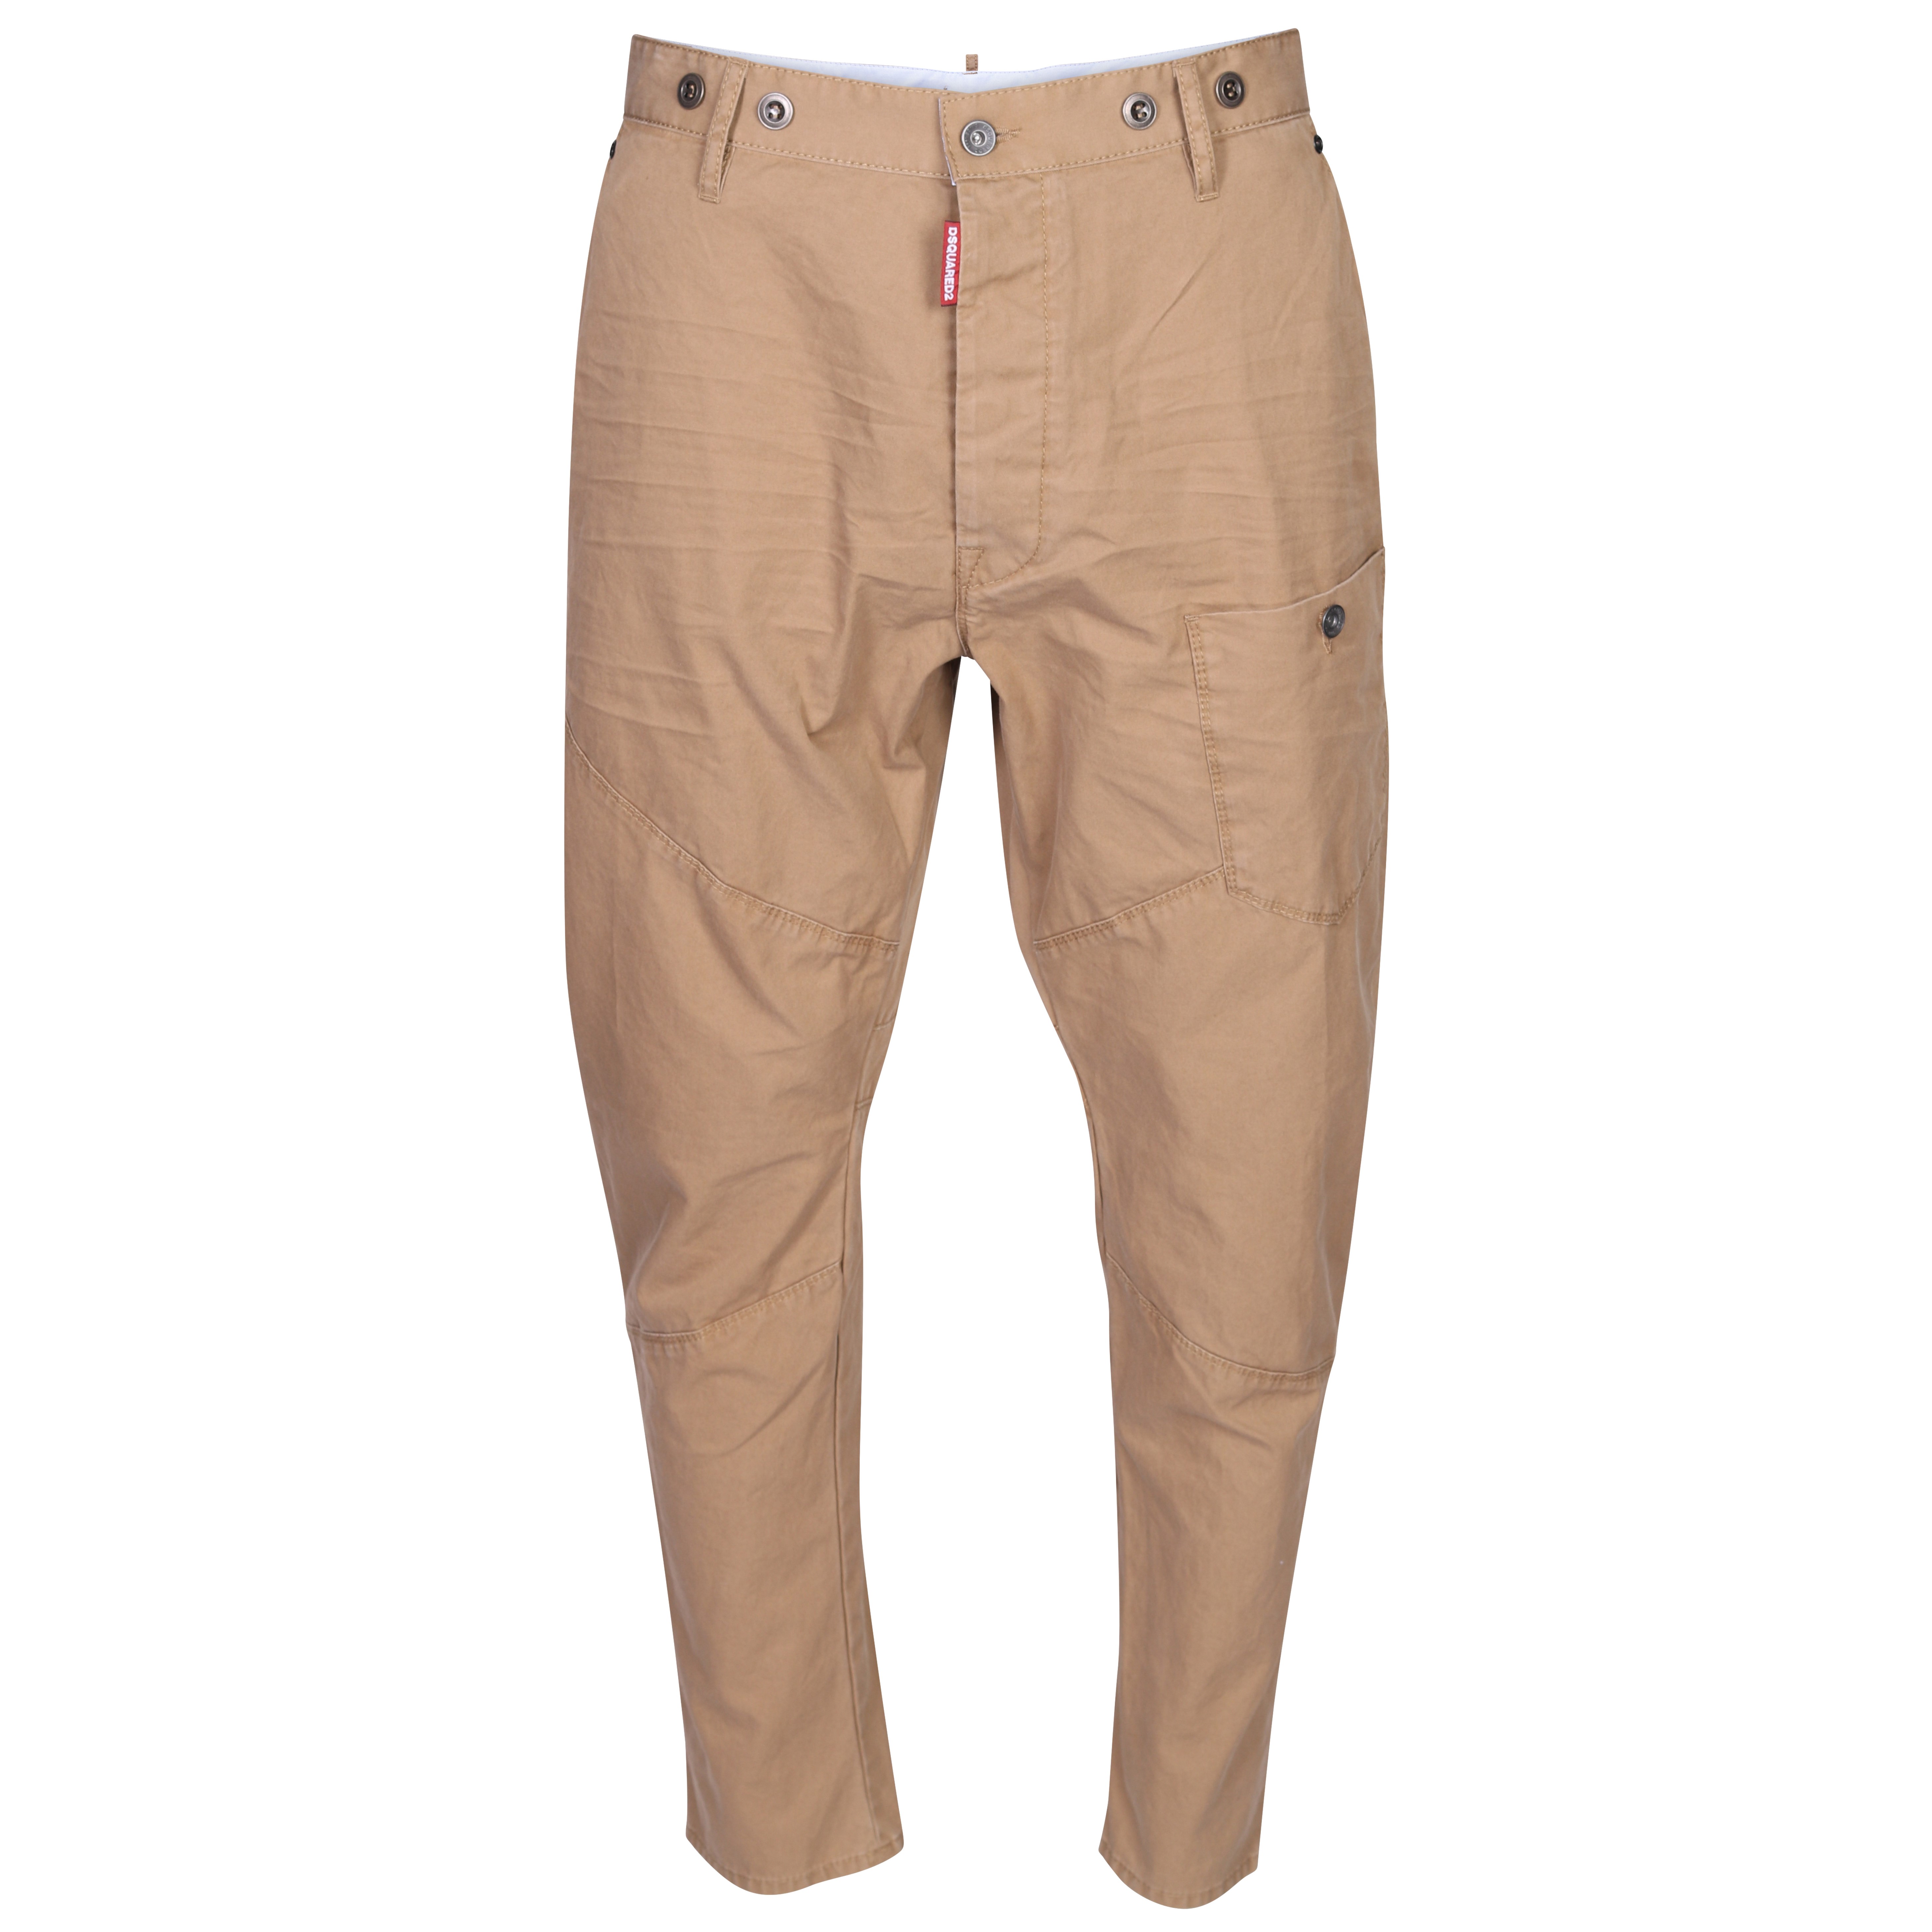 DSQUARED2 Work Combat Pant in Camel 56